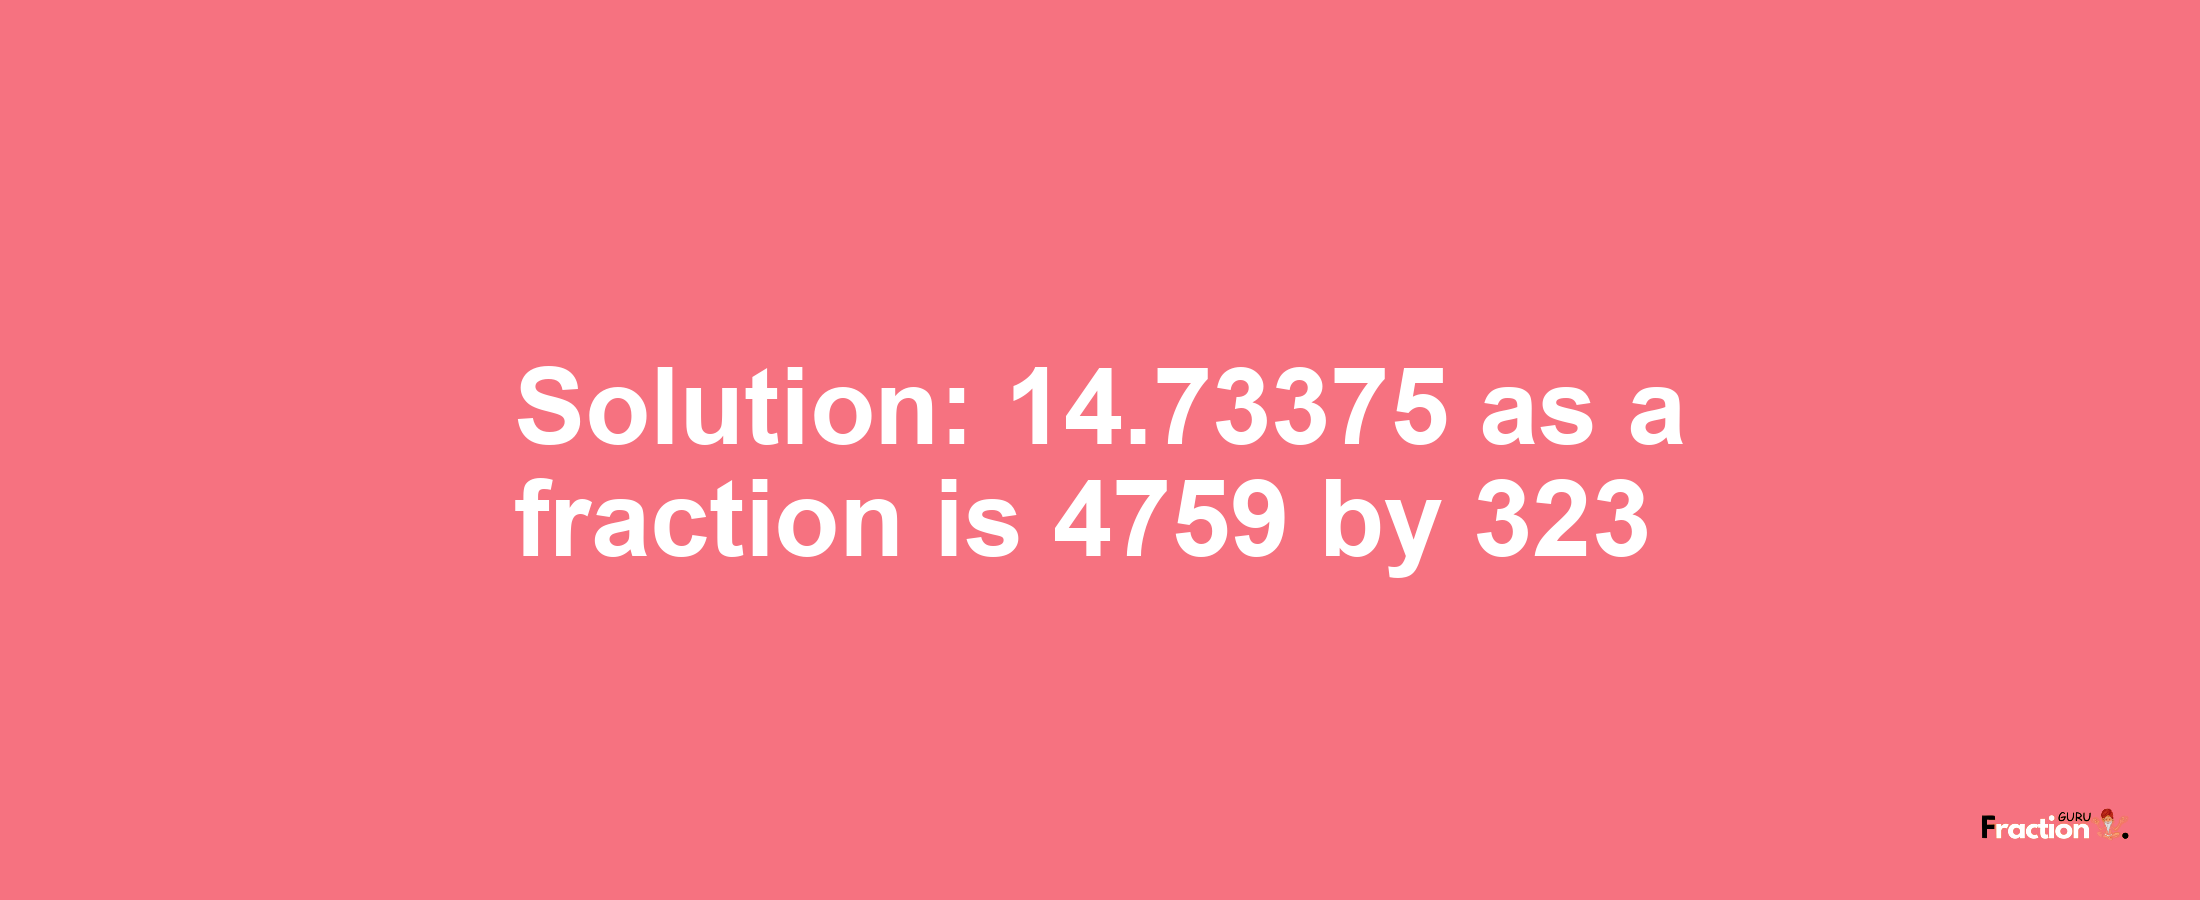 Solution:14.73375 as a fraction is 4759/323